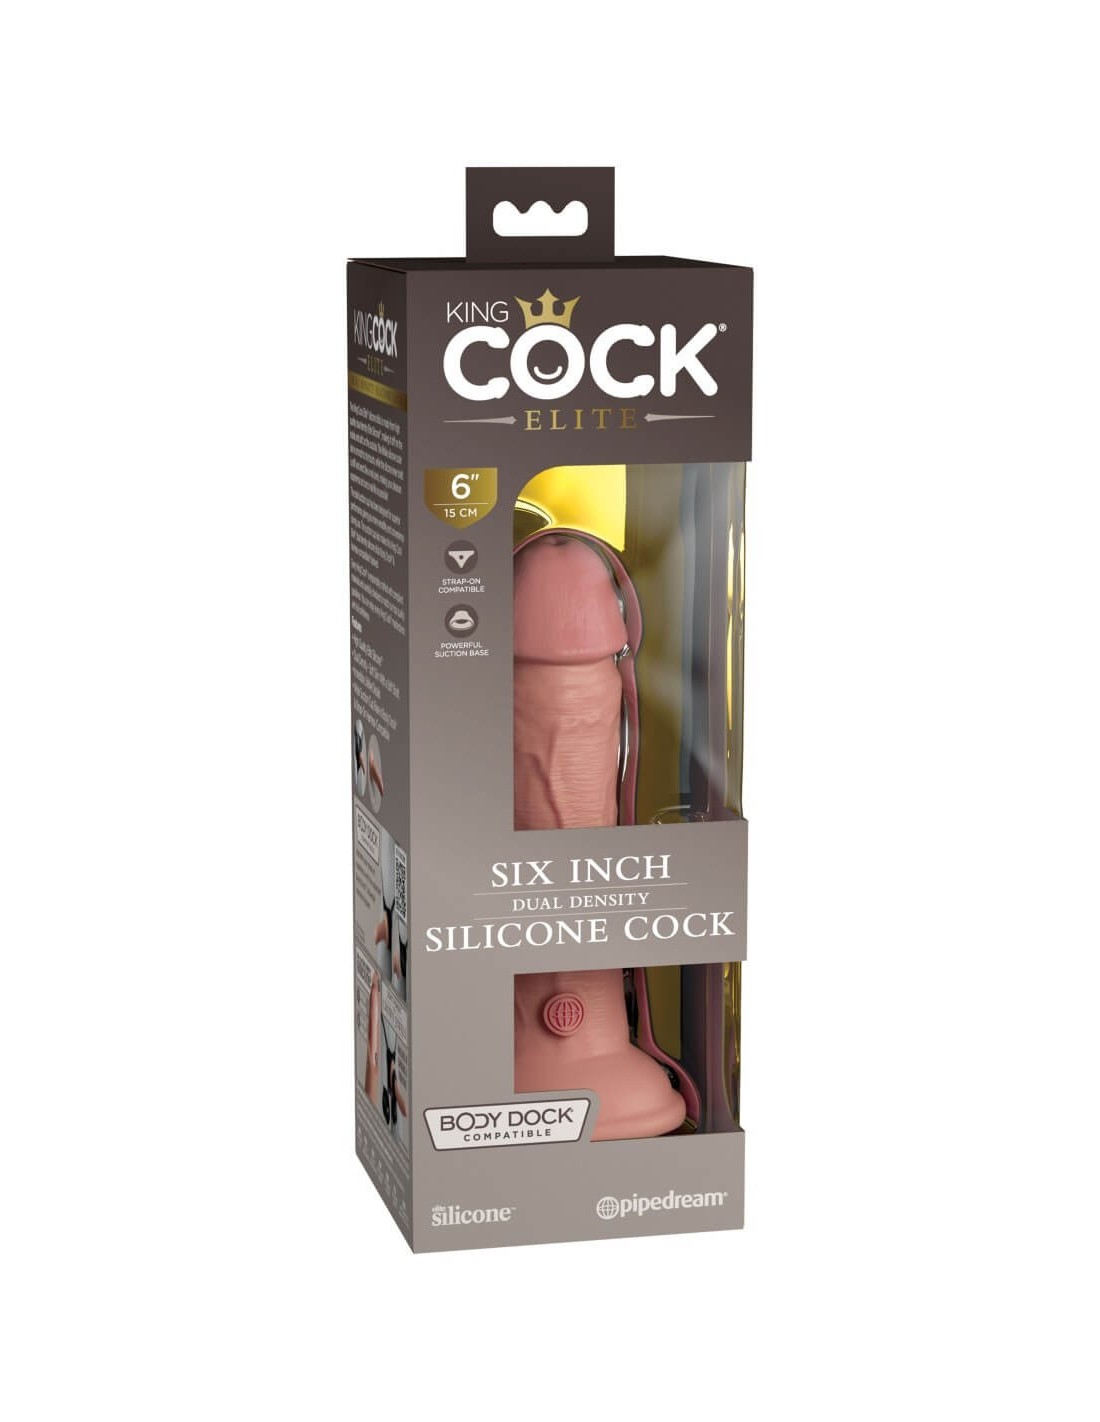 Cock 6 inch Penis Size